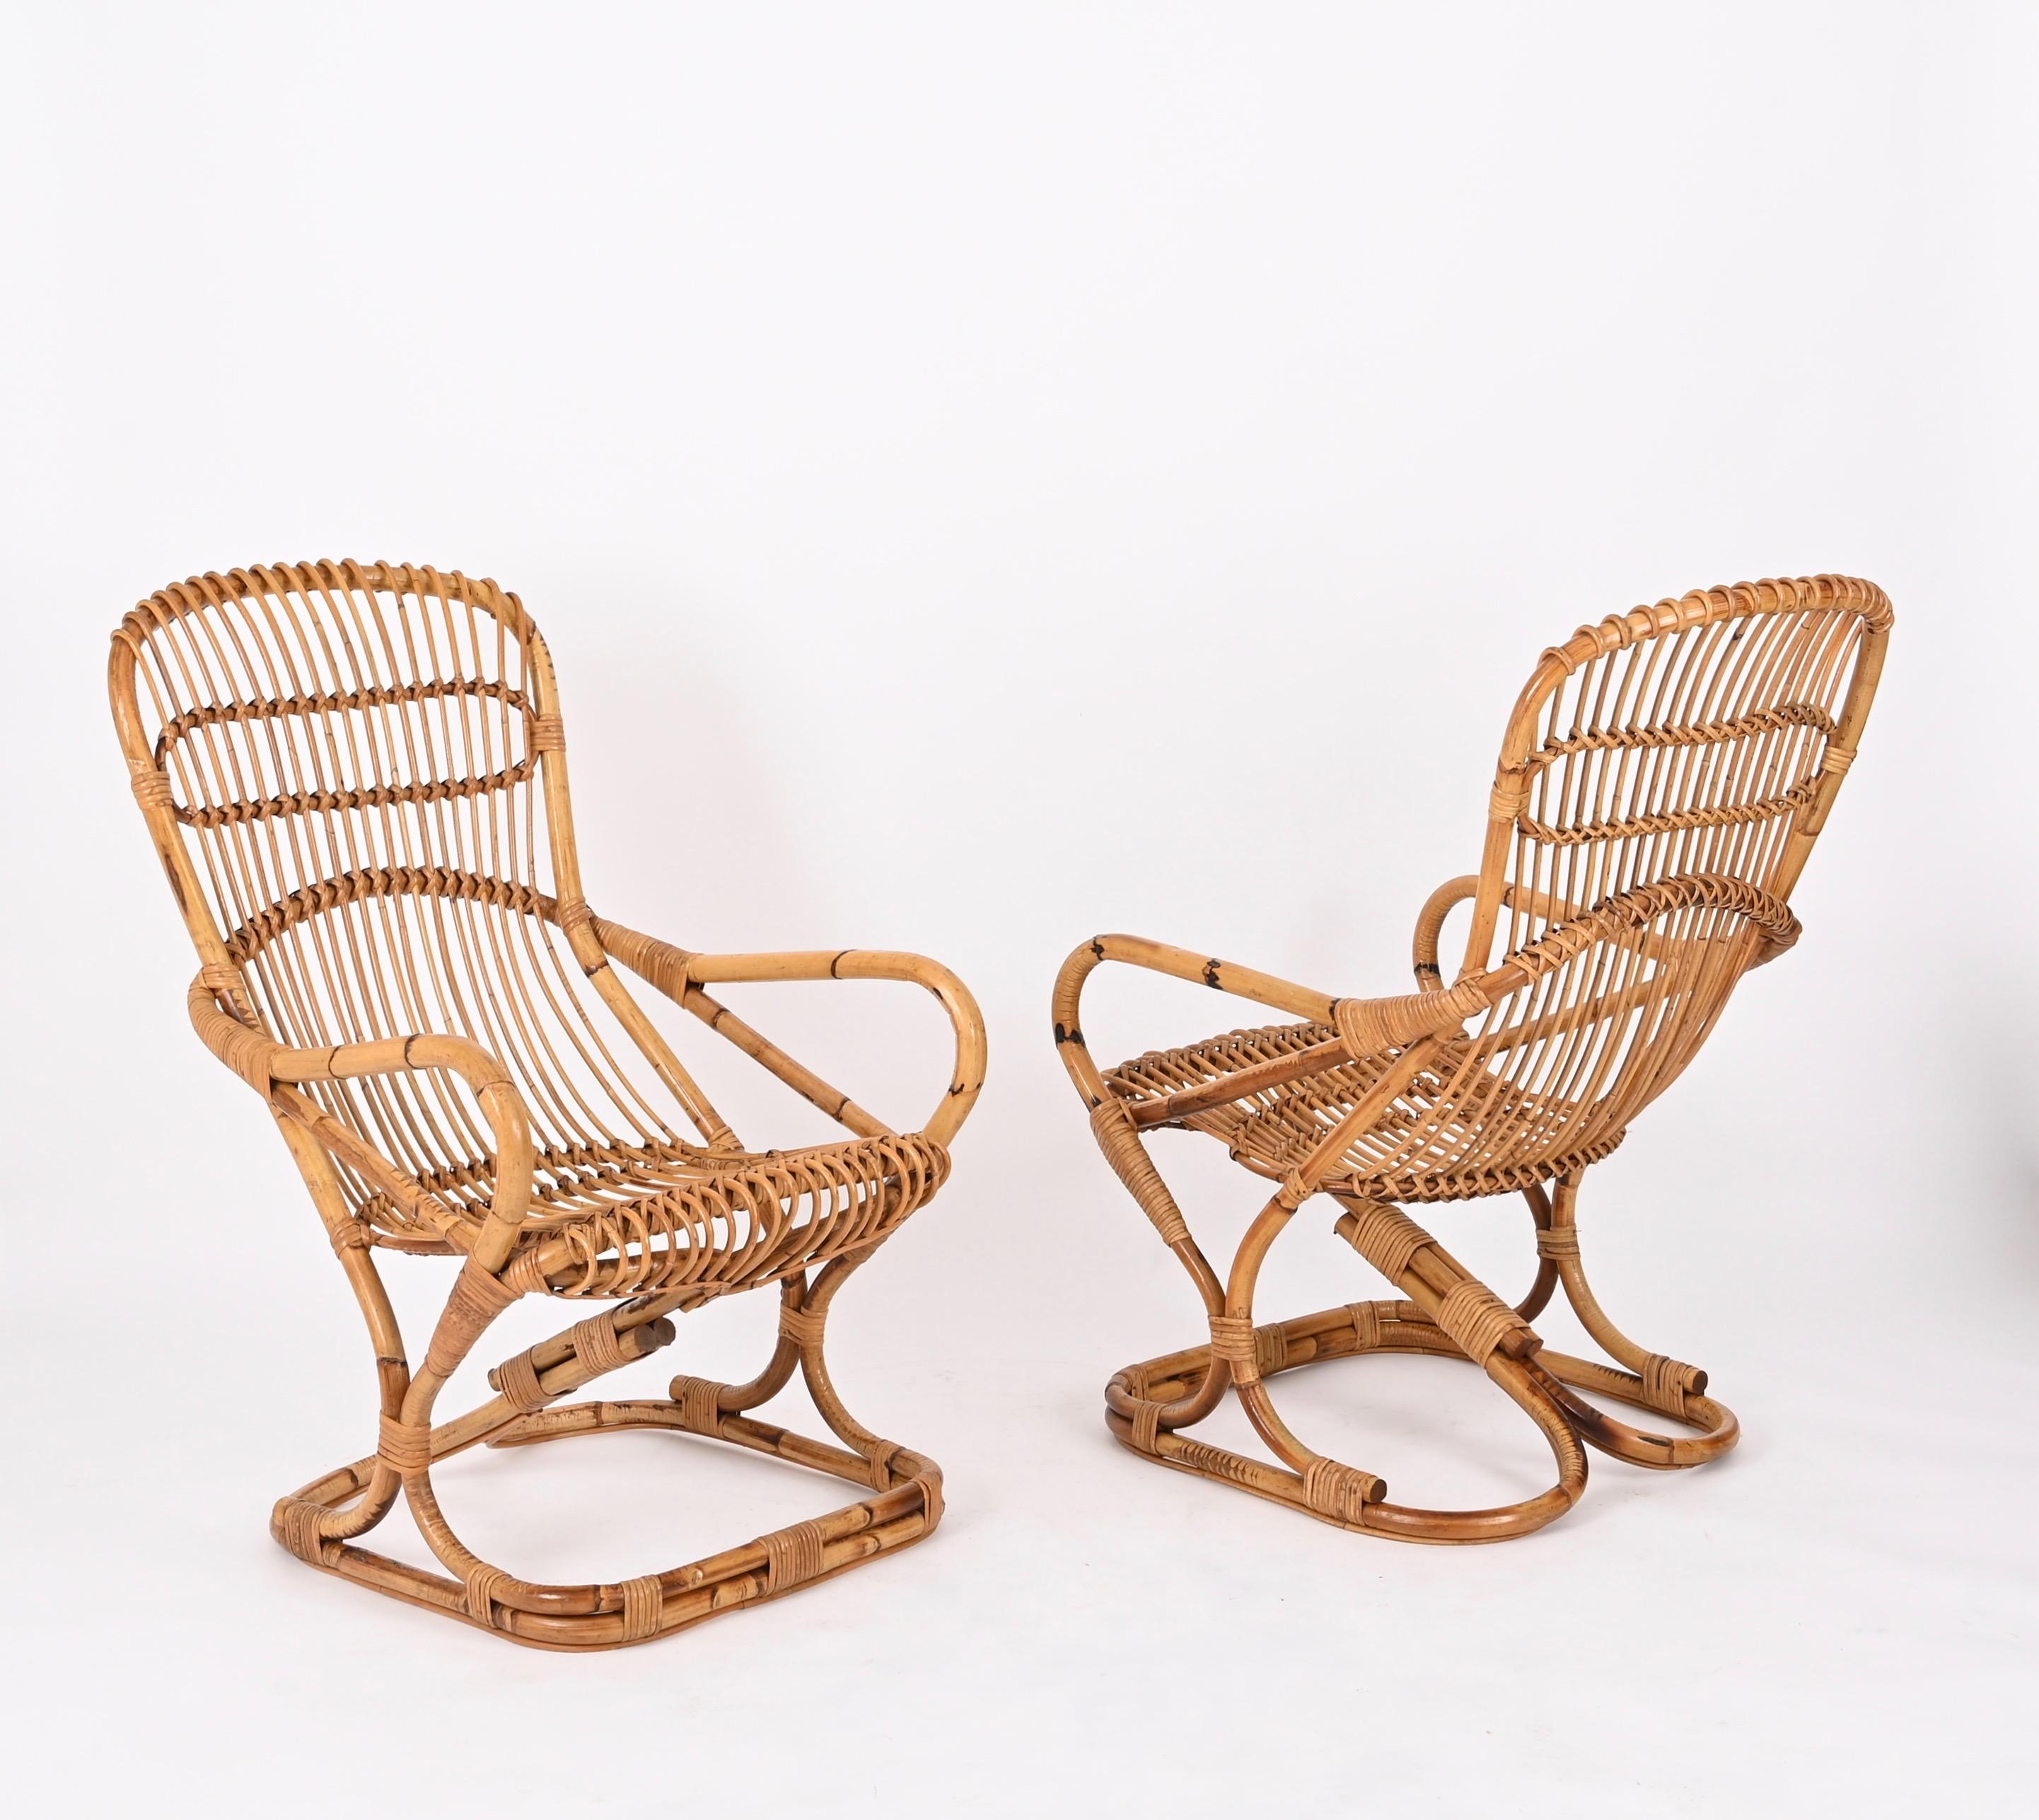 Hand-Crafted Pair of Midcentury Italian Wicker and Rattan Armchairs by Tito Agnoli, 1960s For Sale